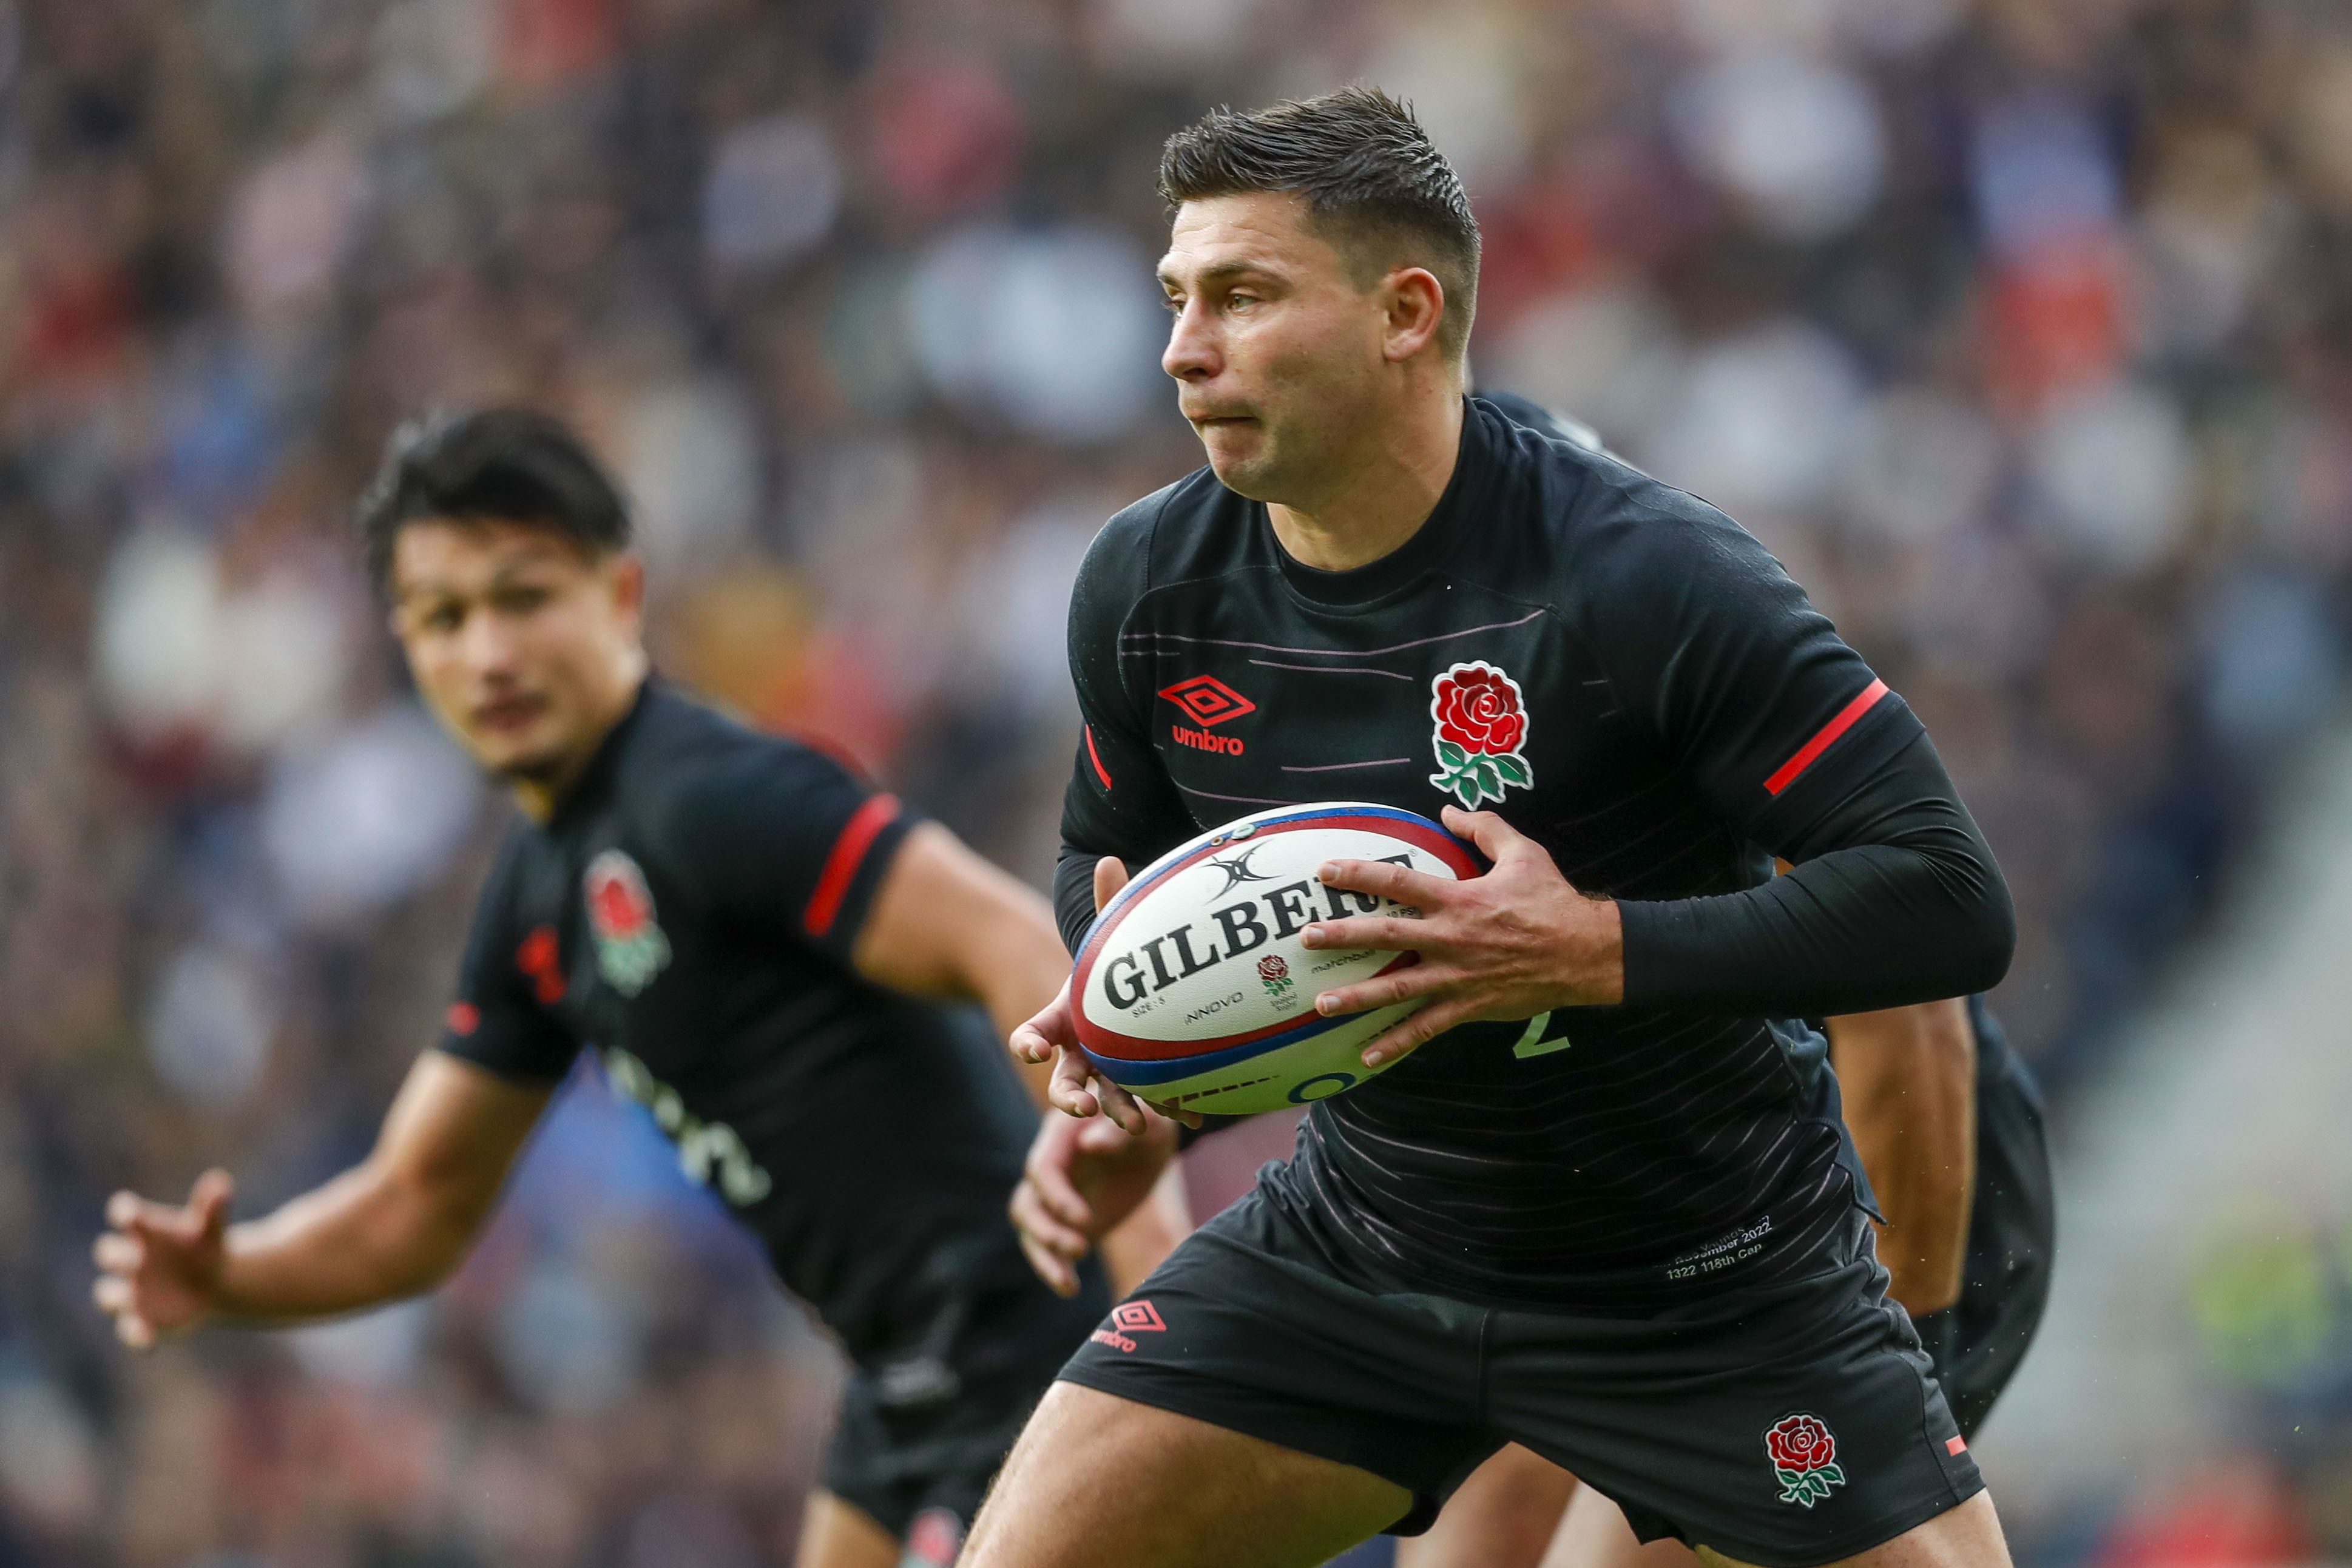 Ben Youngs is England's most capped player